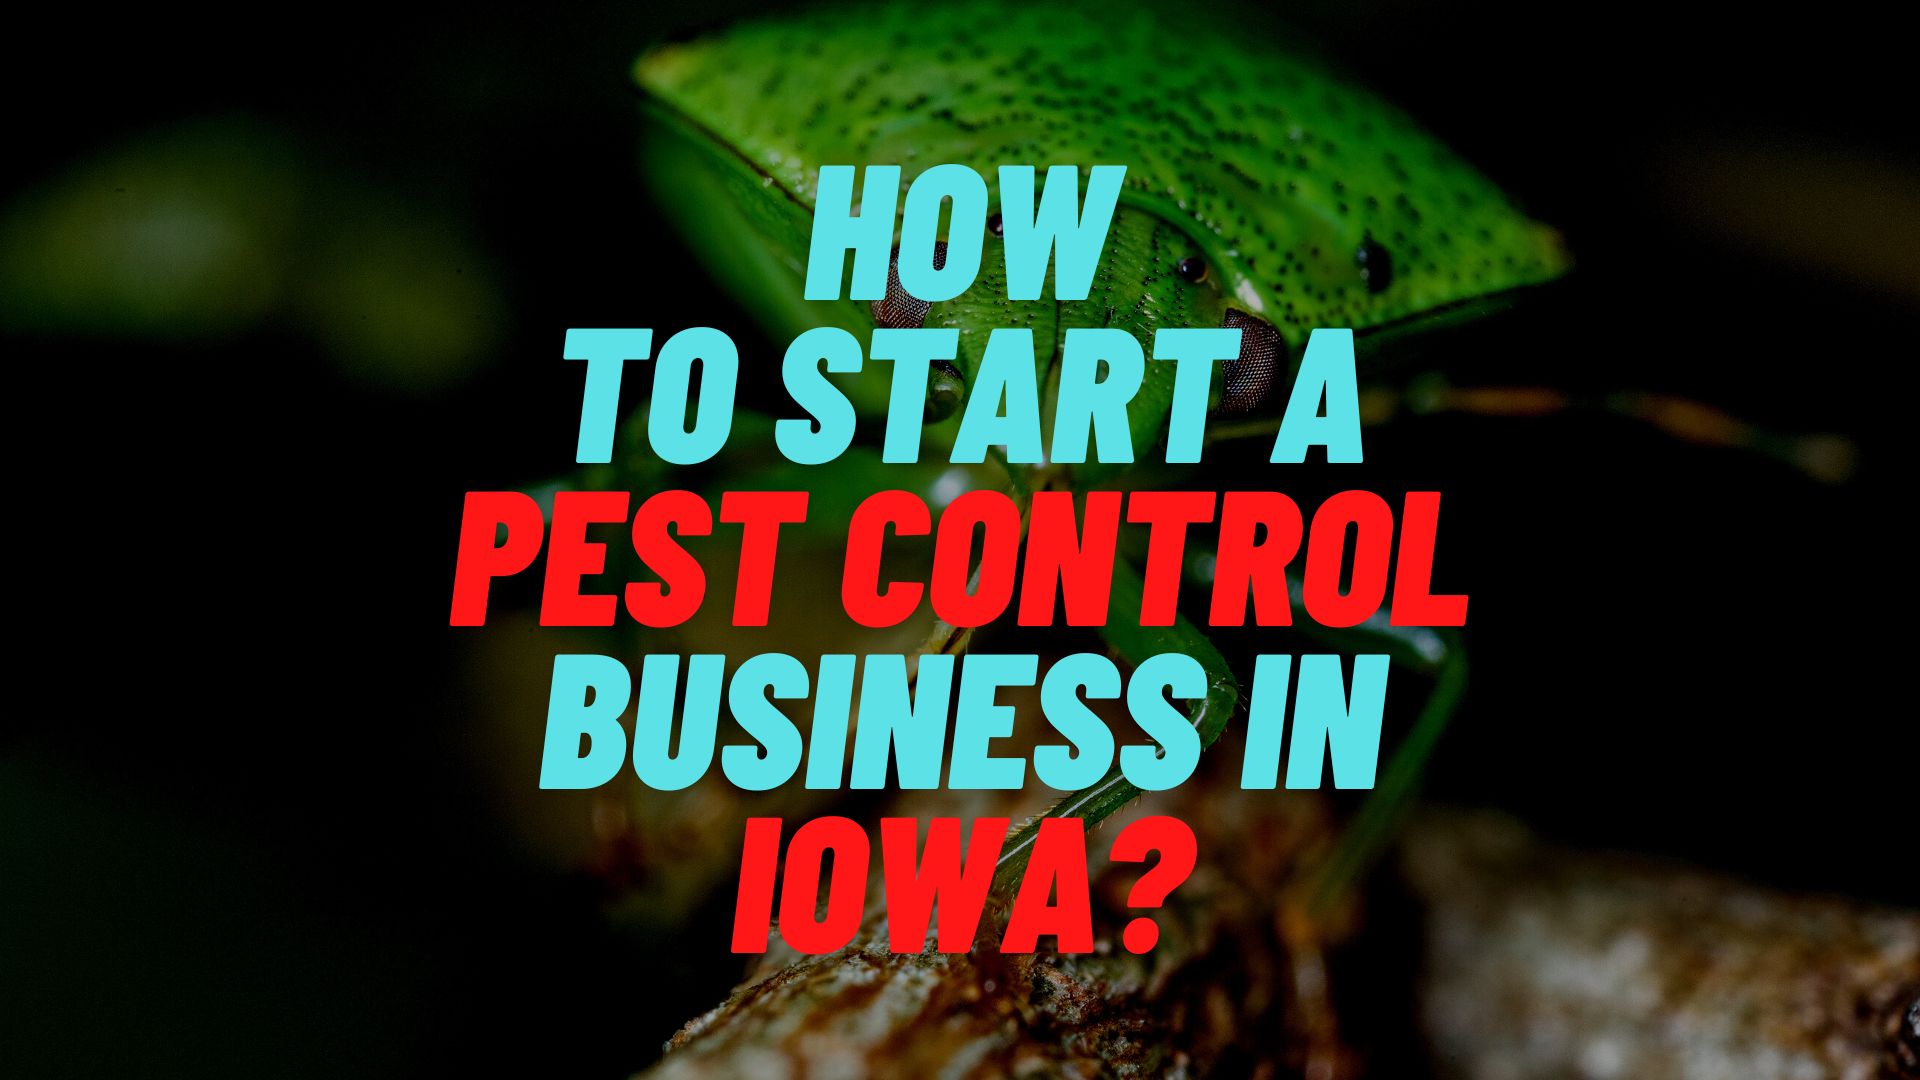 How to start a pest control business in Iowa?